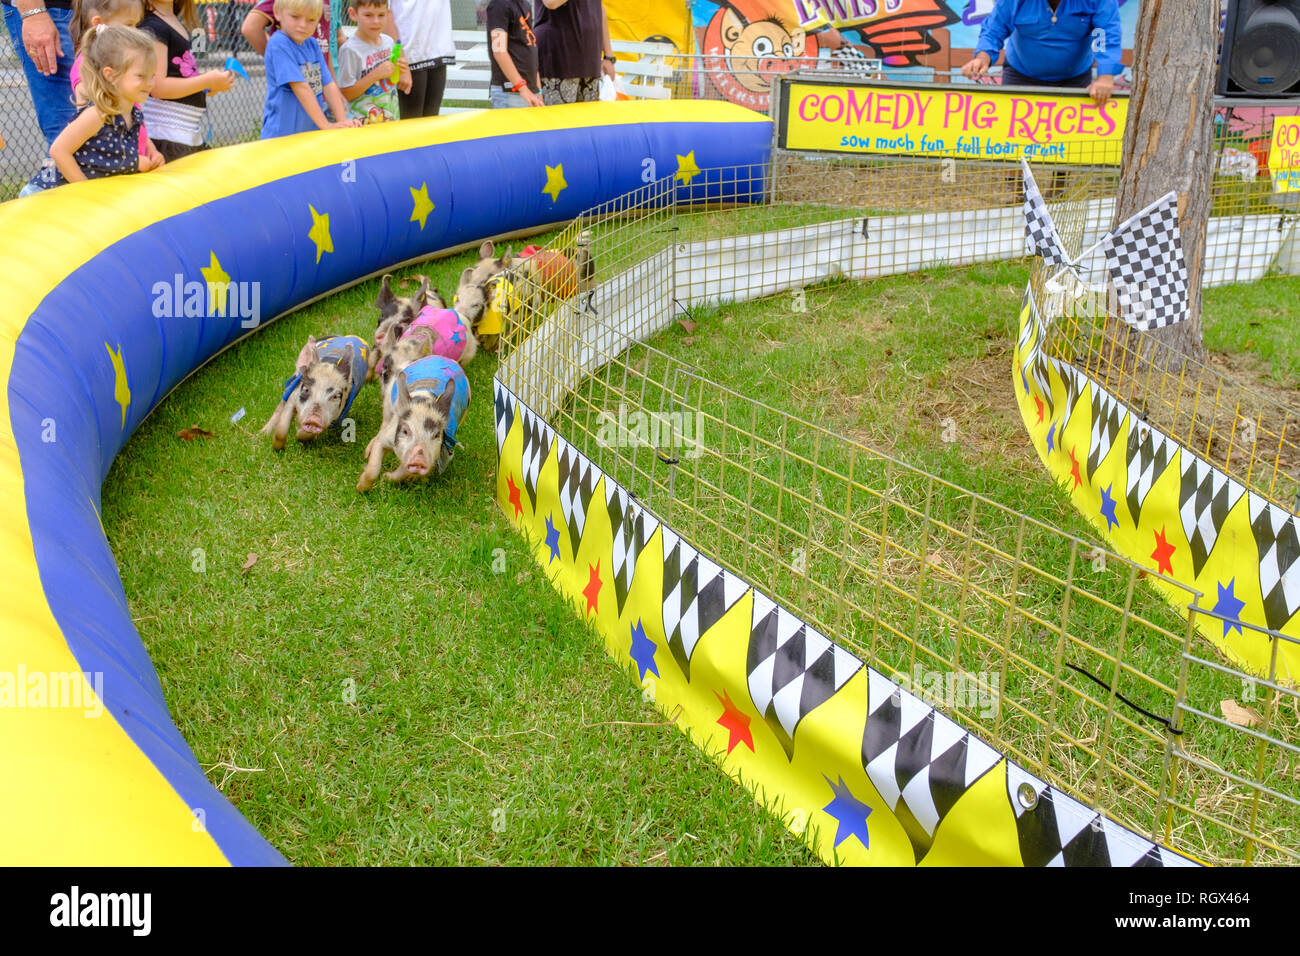 Kids and adults watching piglets racing, running around race circuit, having fun at pig racing at Australian country agricultural show, NSW, Australia Stock Photo